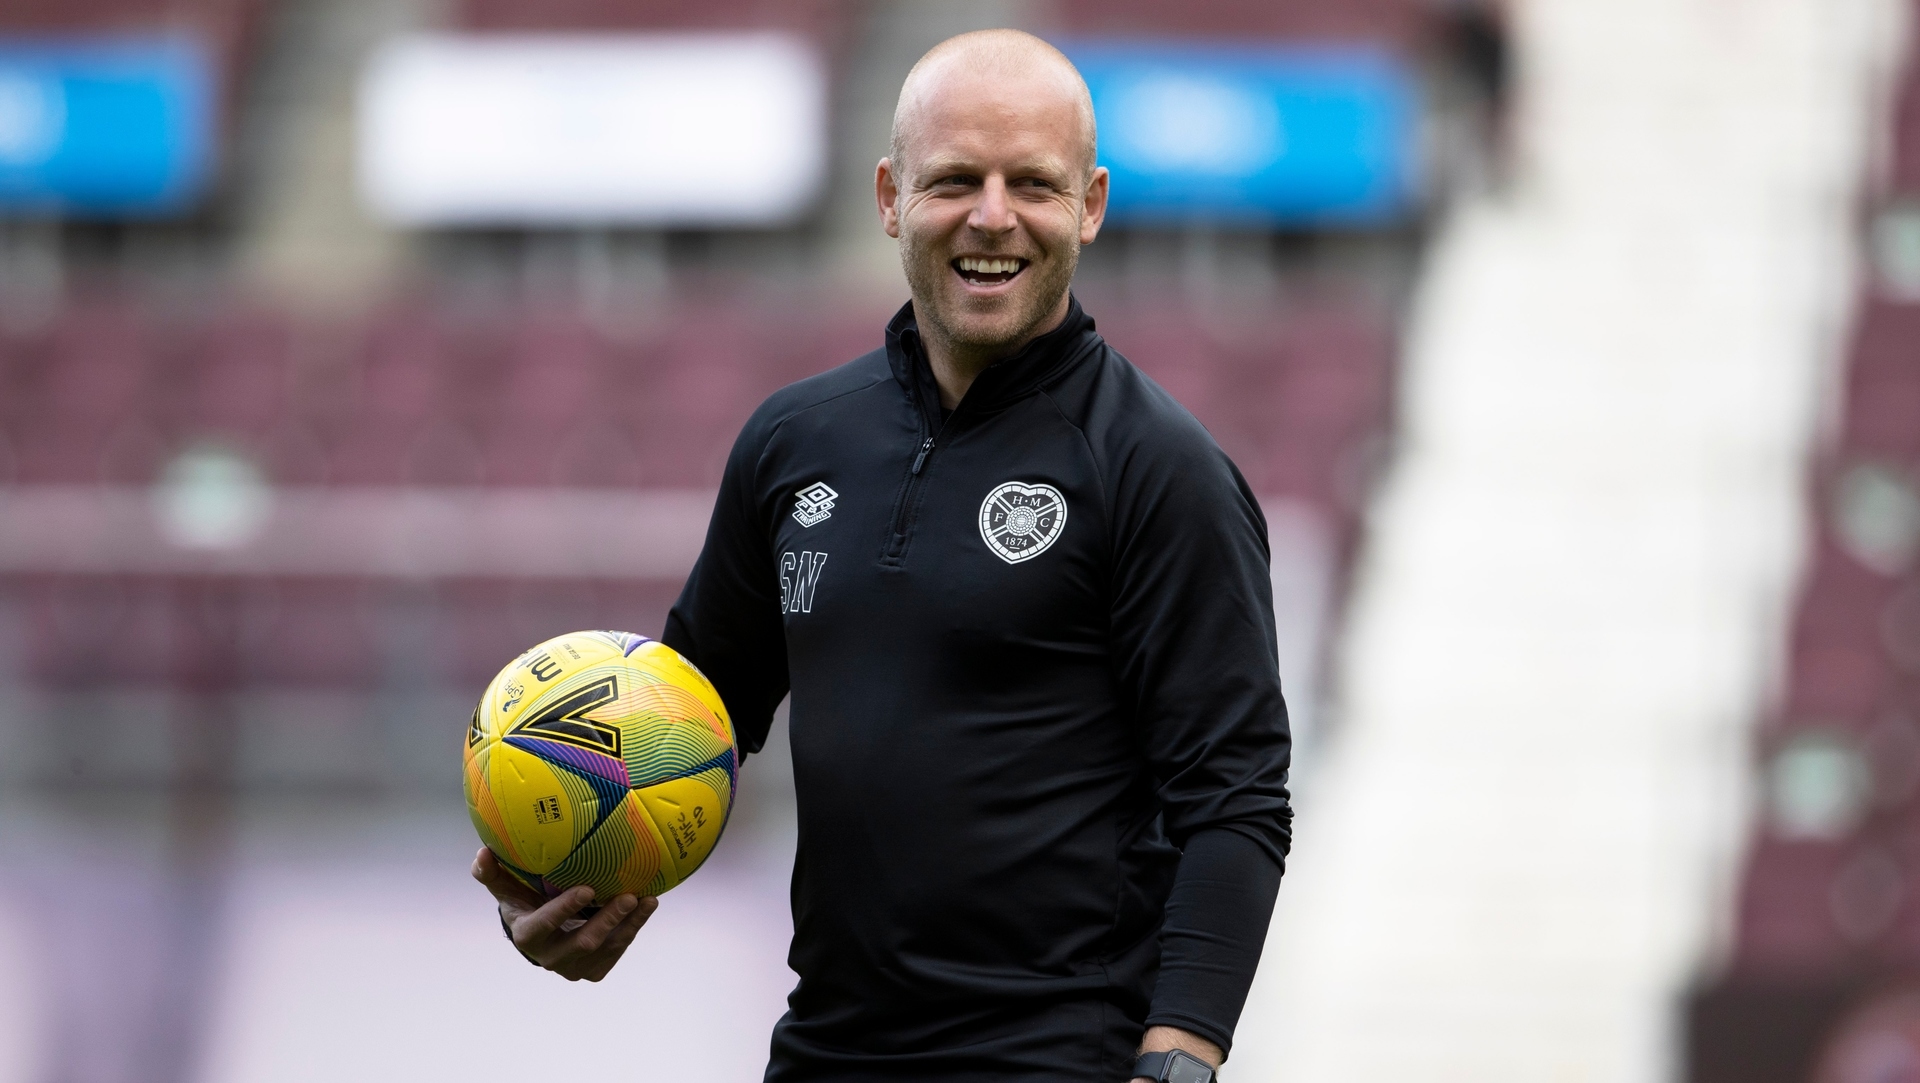 Steven Naismith will take charge of the side until the end of the campaign.